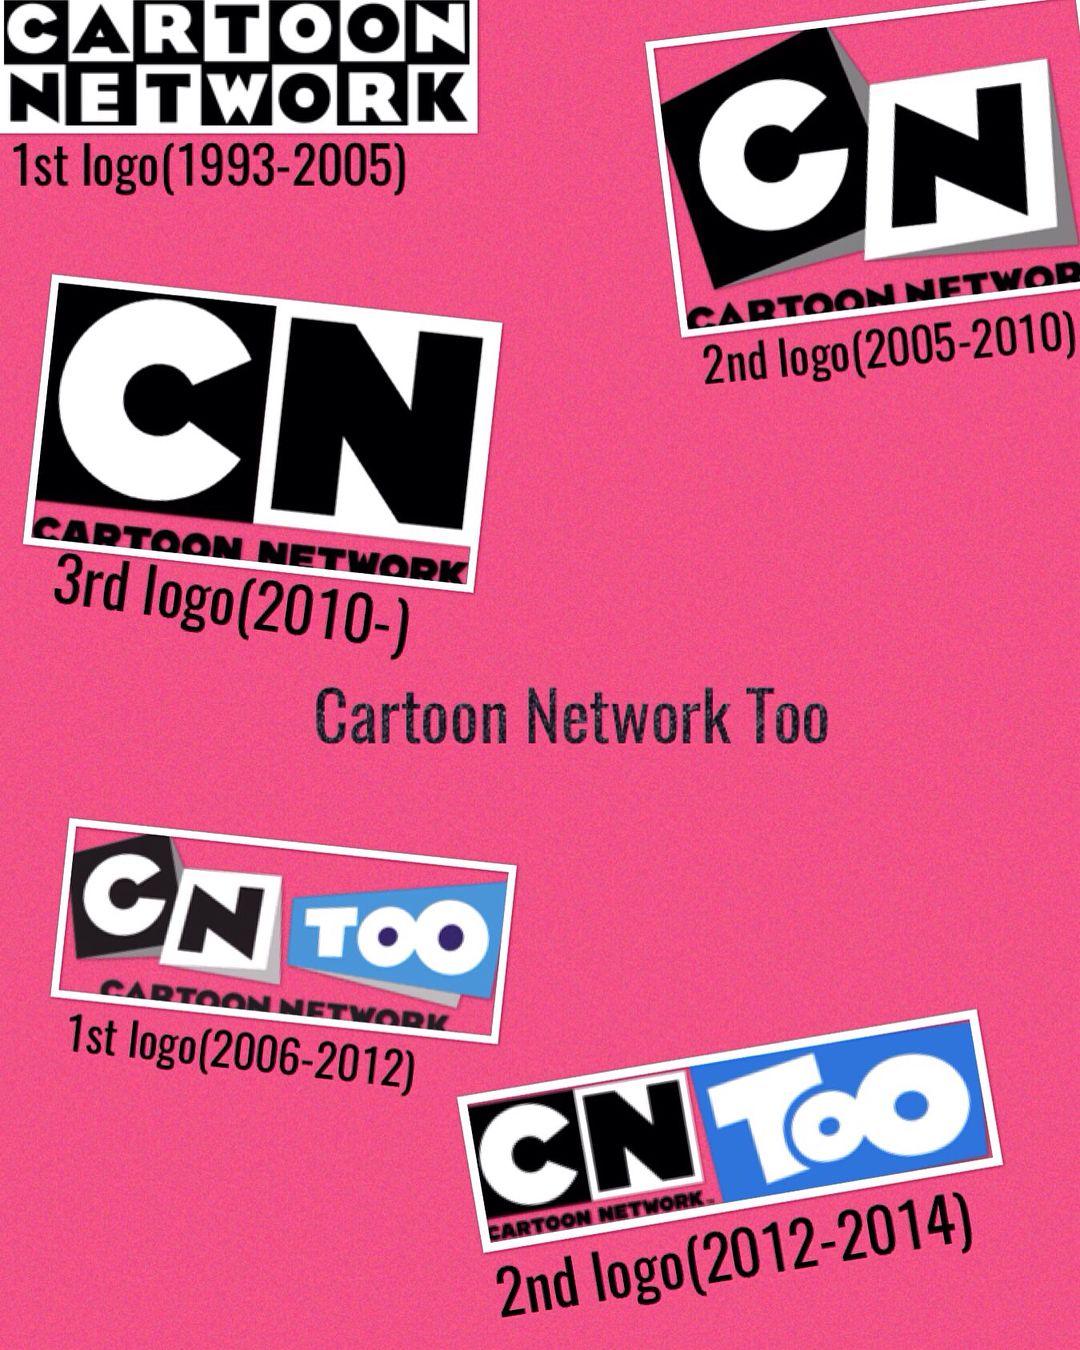 2006 Cartoon Network Too Logo - image tagged with #ripcntoo on instagram